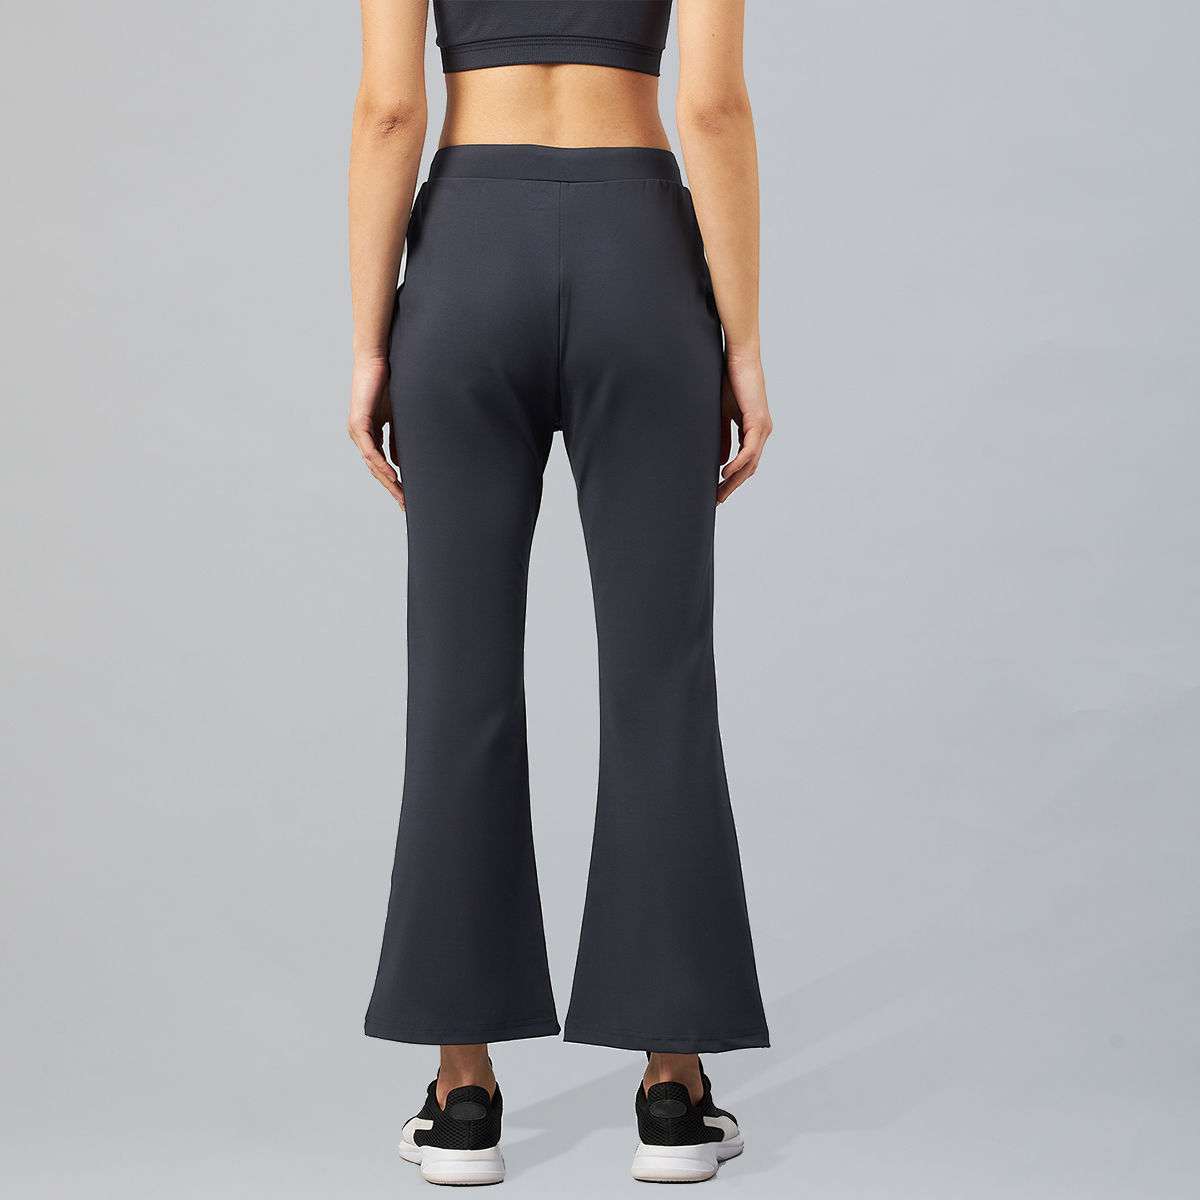 Flared Leggings or Yoga Pants Are Back In Style  and They Actually Look  Good